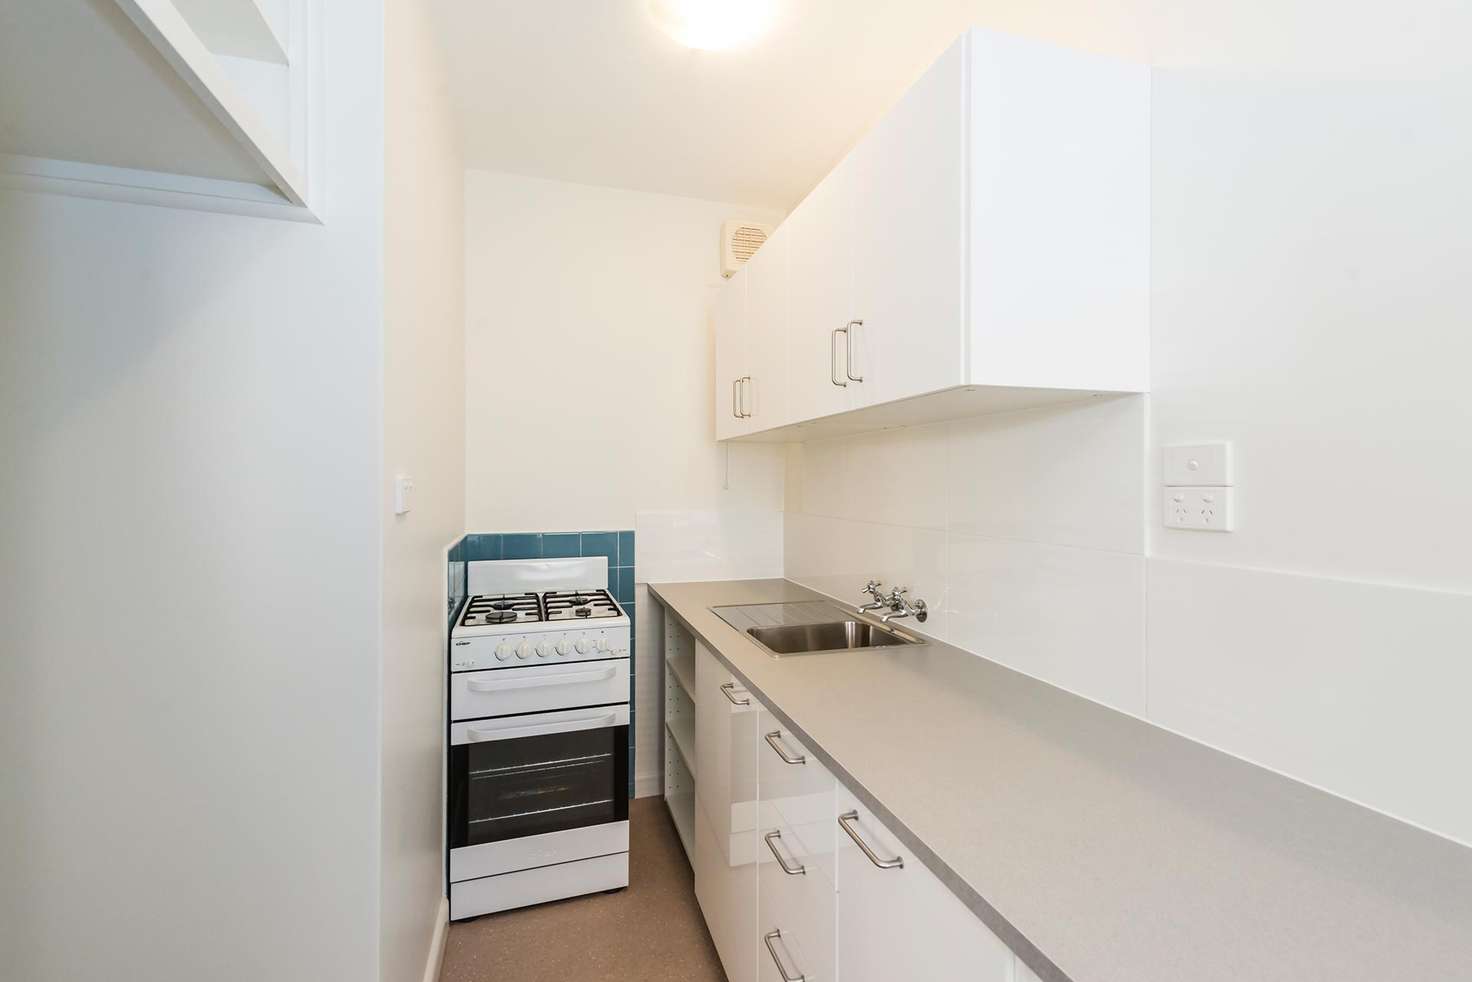 Main view of Homely apartment listing, 2/32 Blanche Street, St Kilda VIC 3182